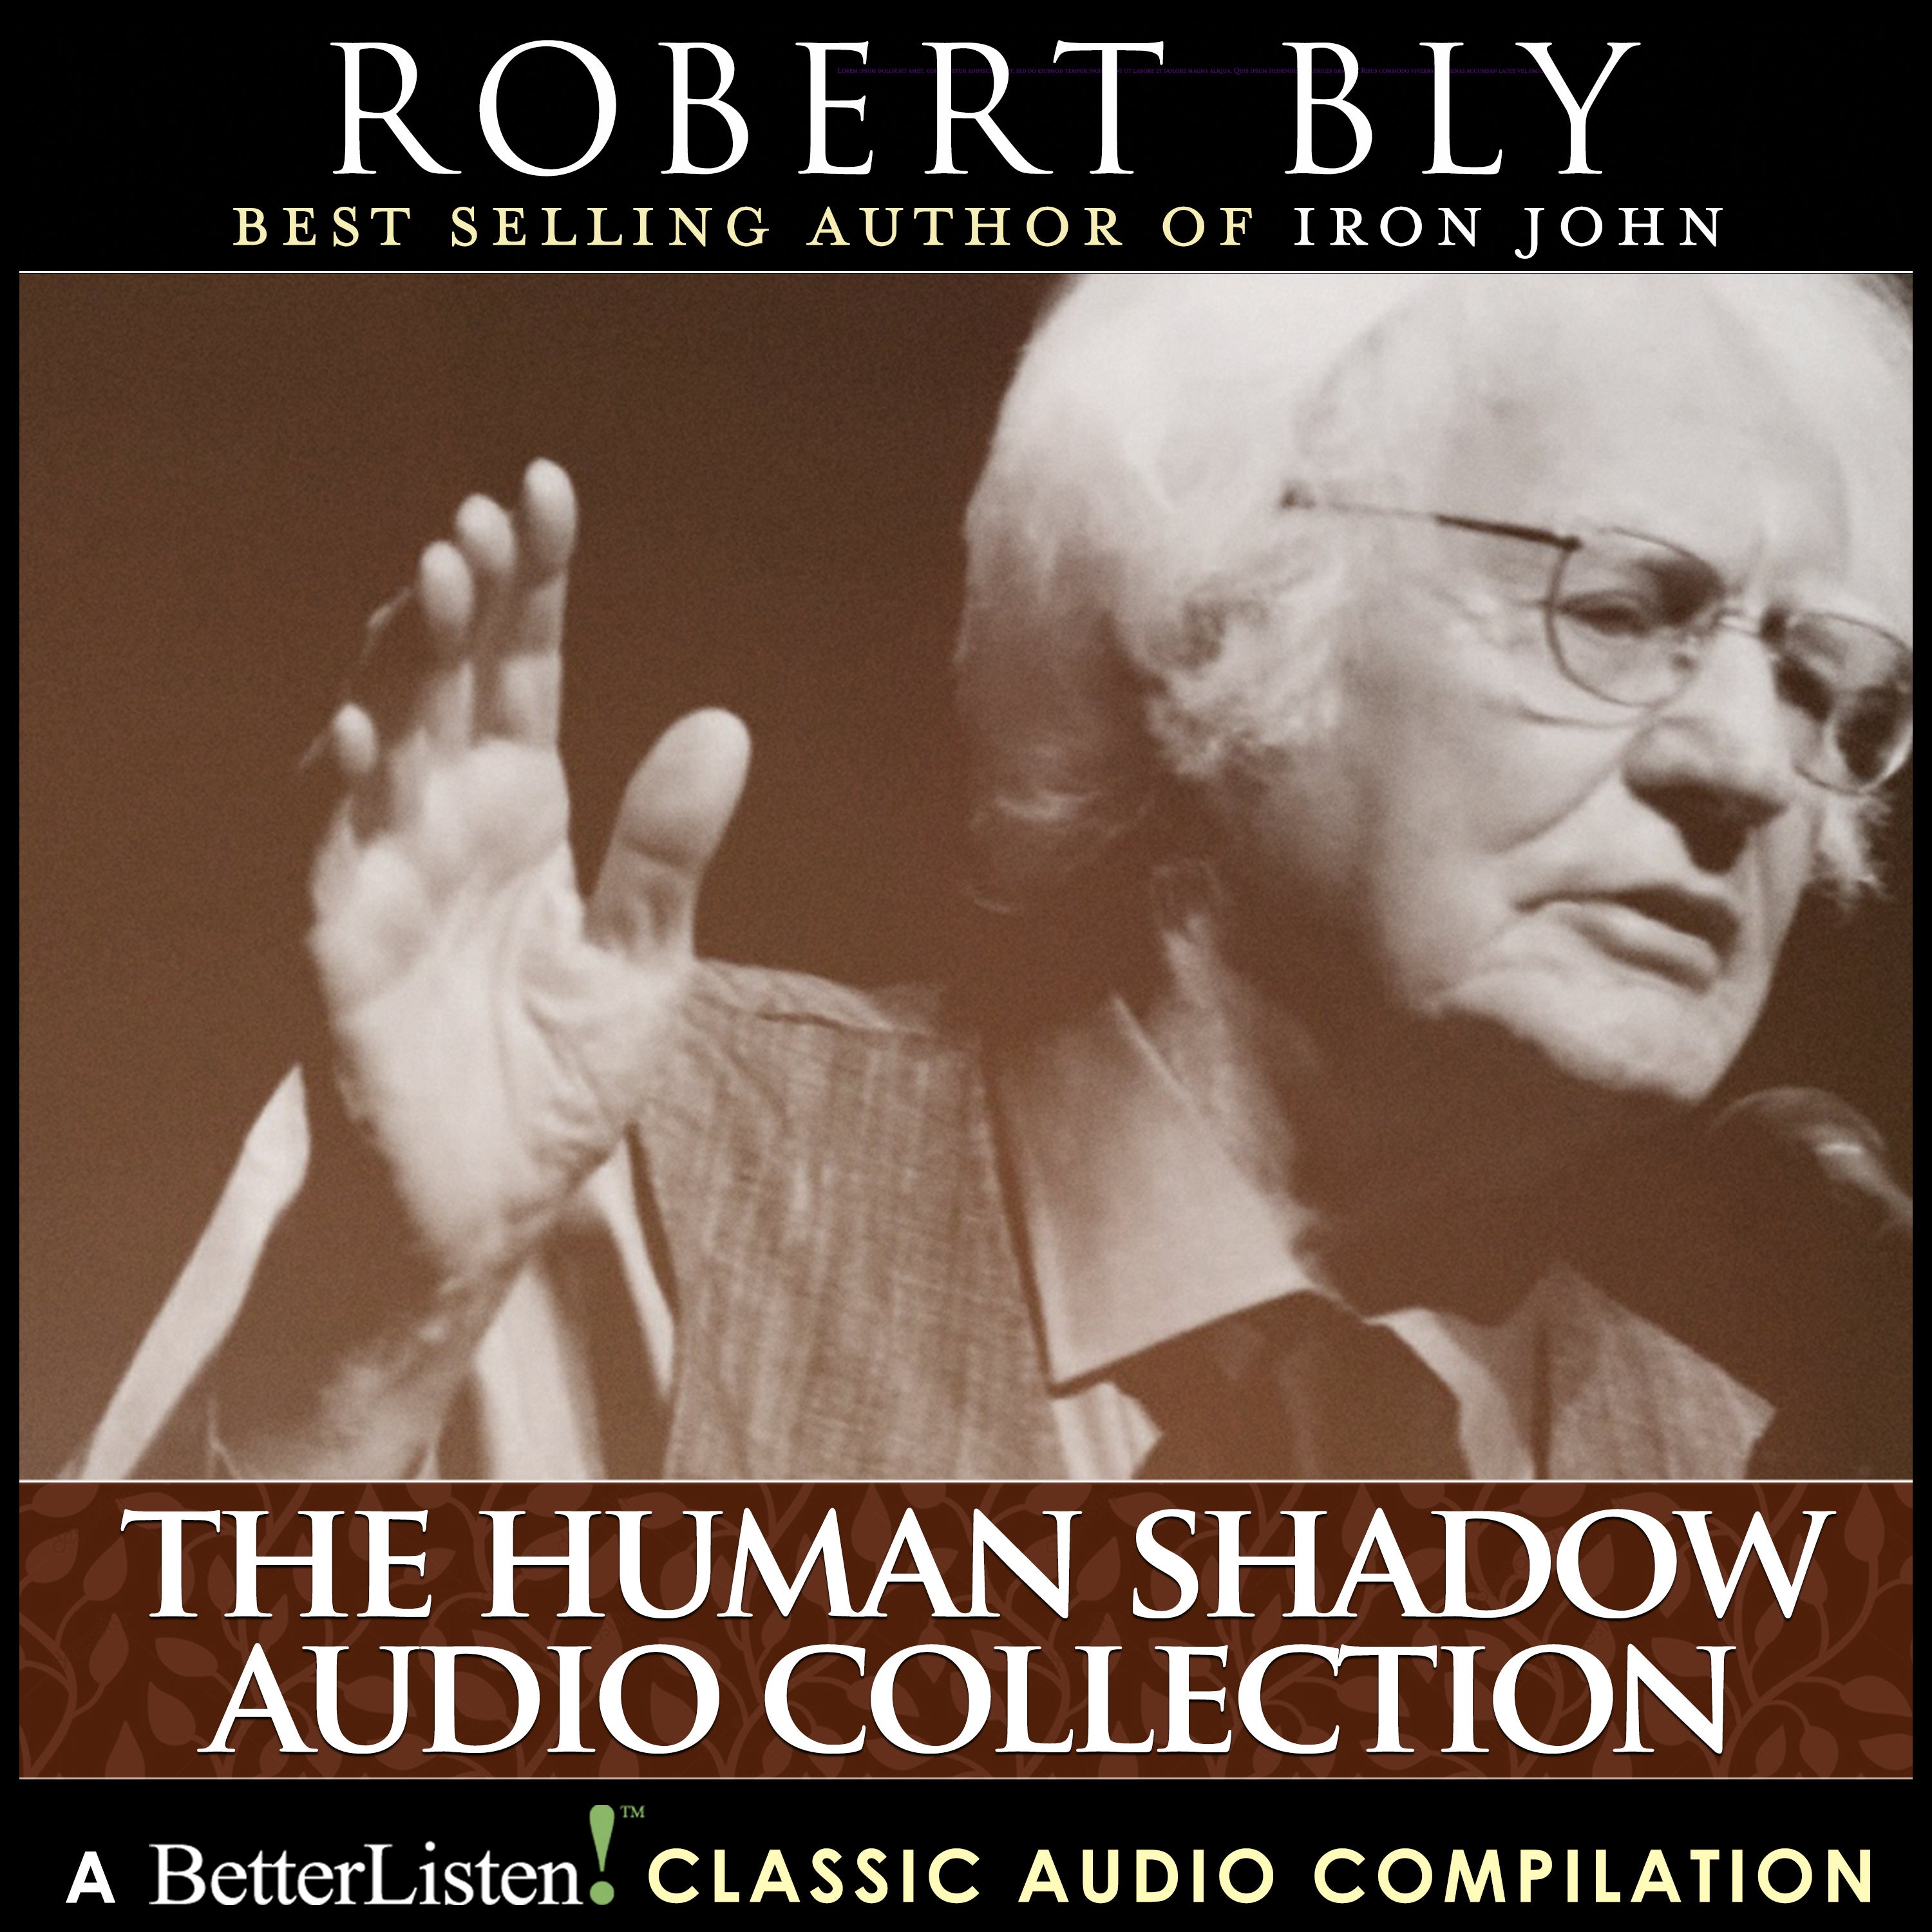 The Human Shadow Audio Collection with Robert Bly